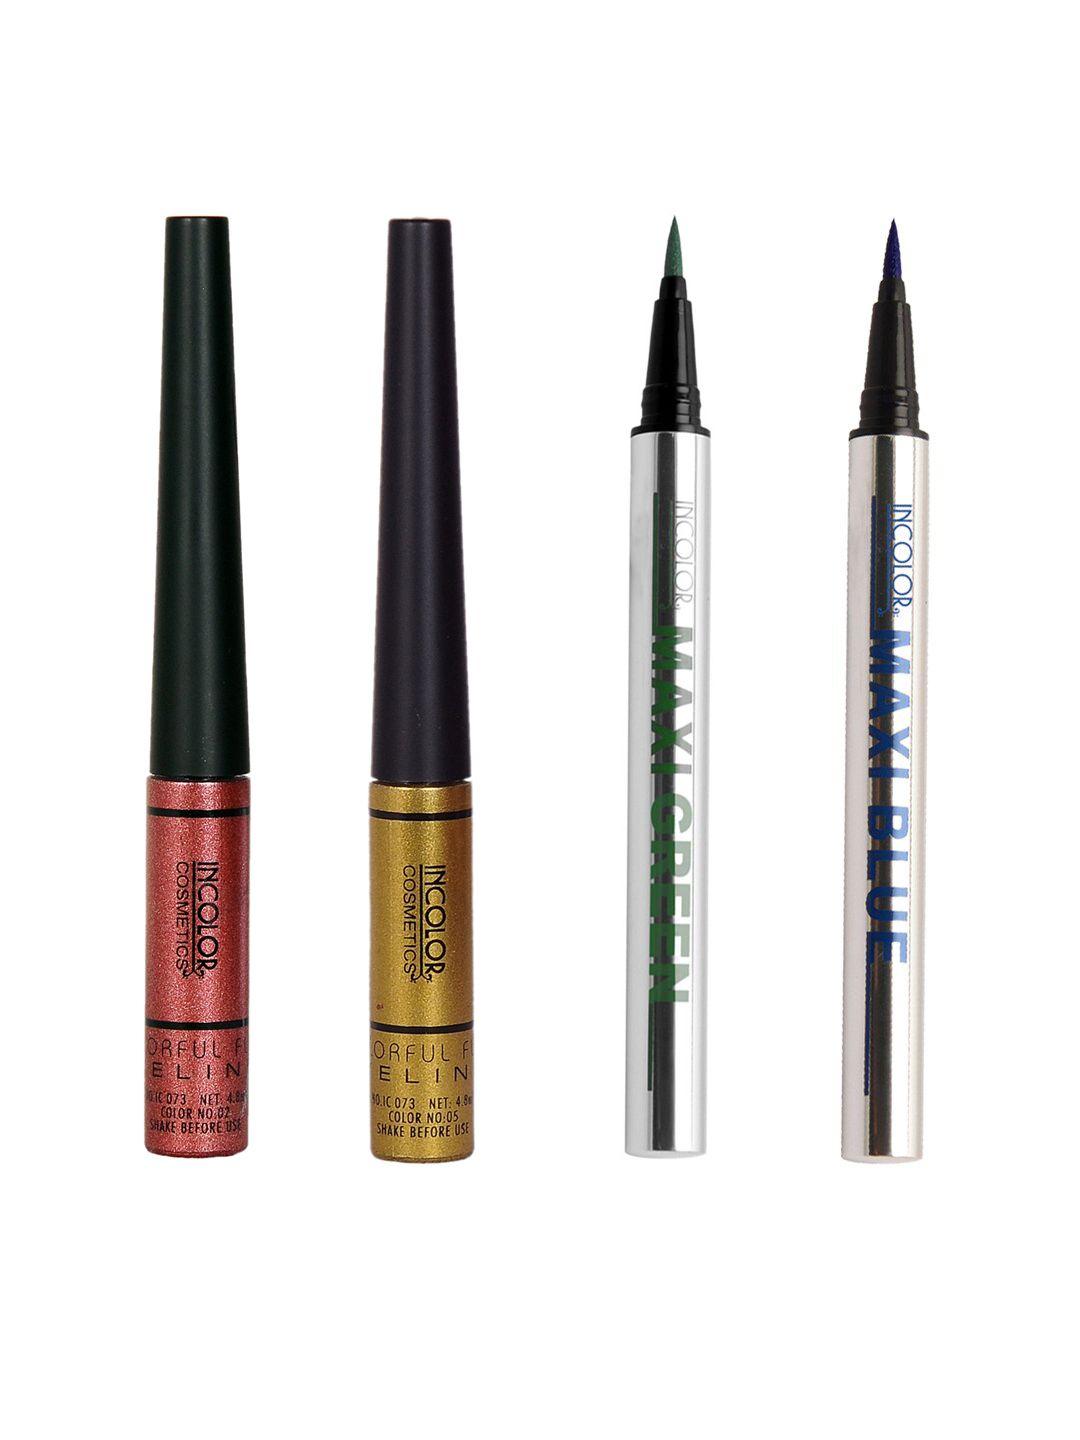 incolor set of 4 eyeliners